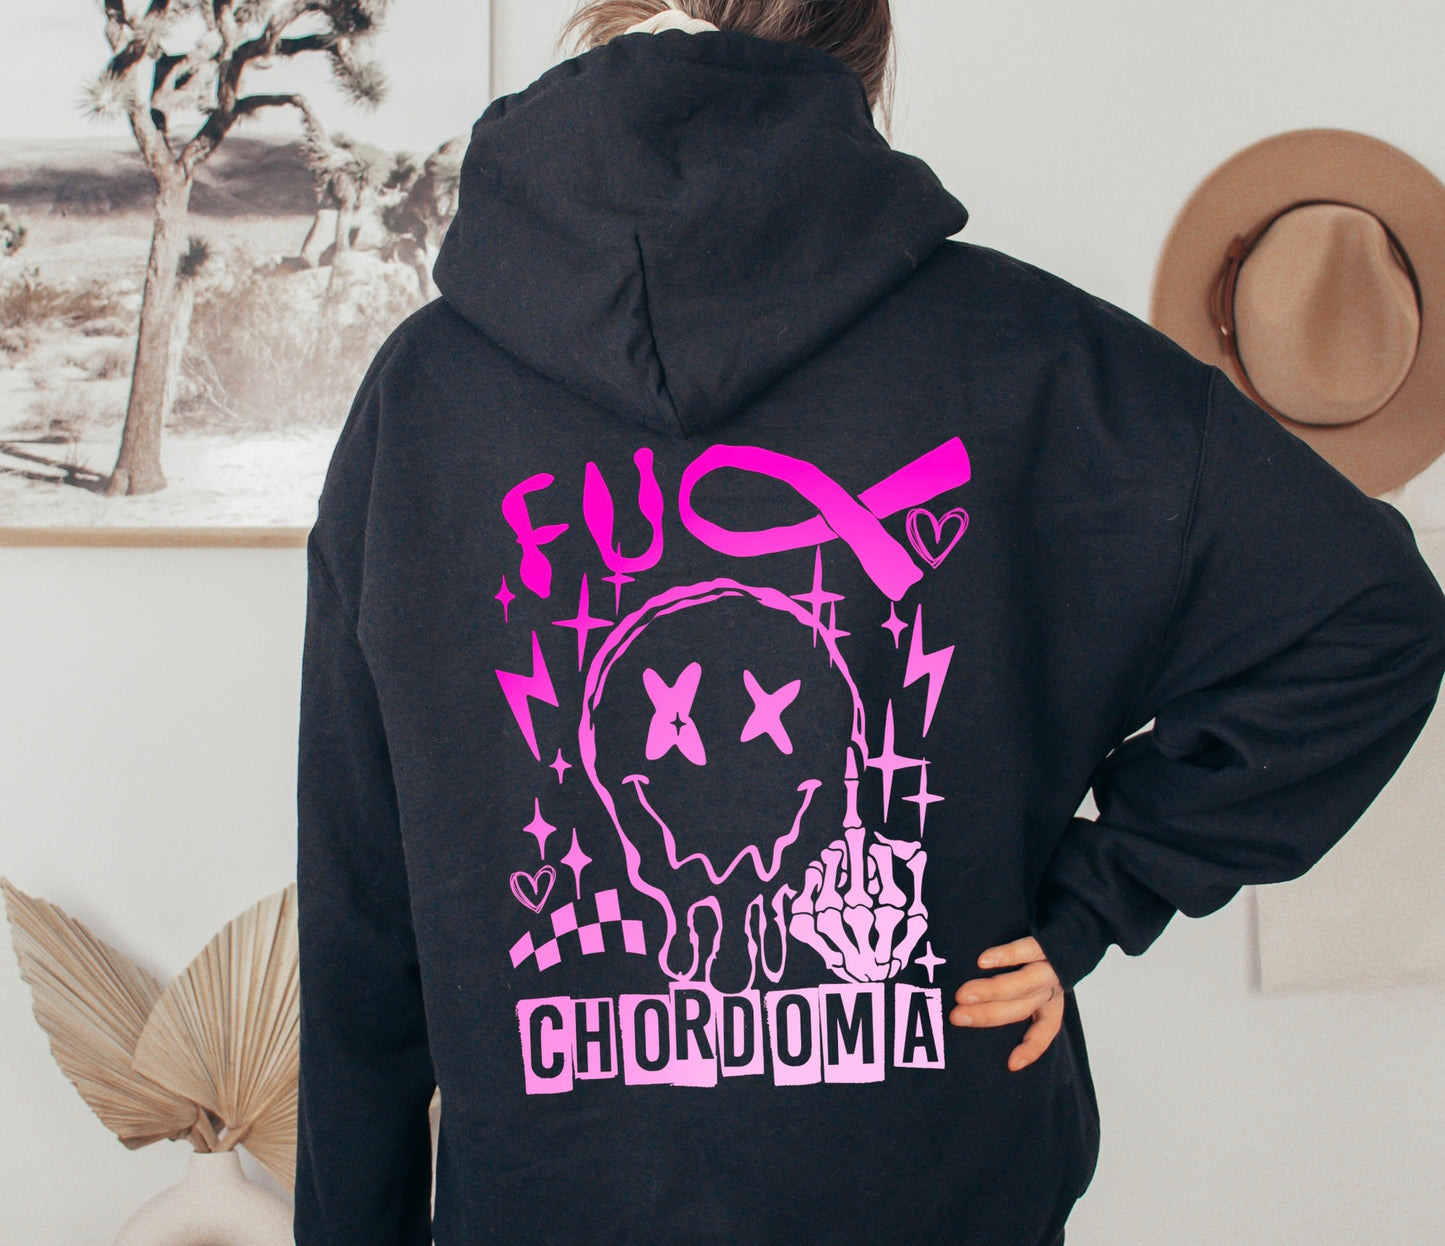 F*CK CHORDOMA (Millie’s Campaign)